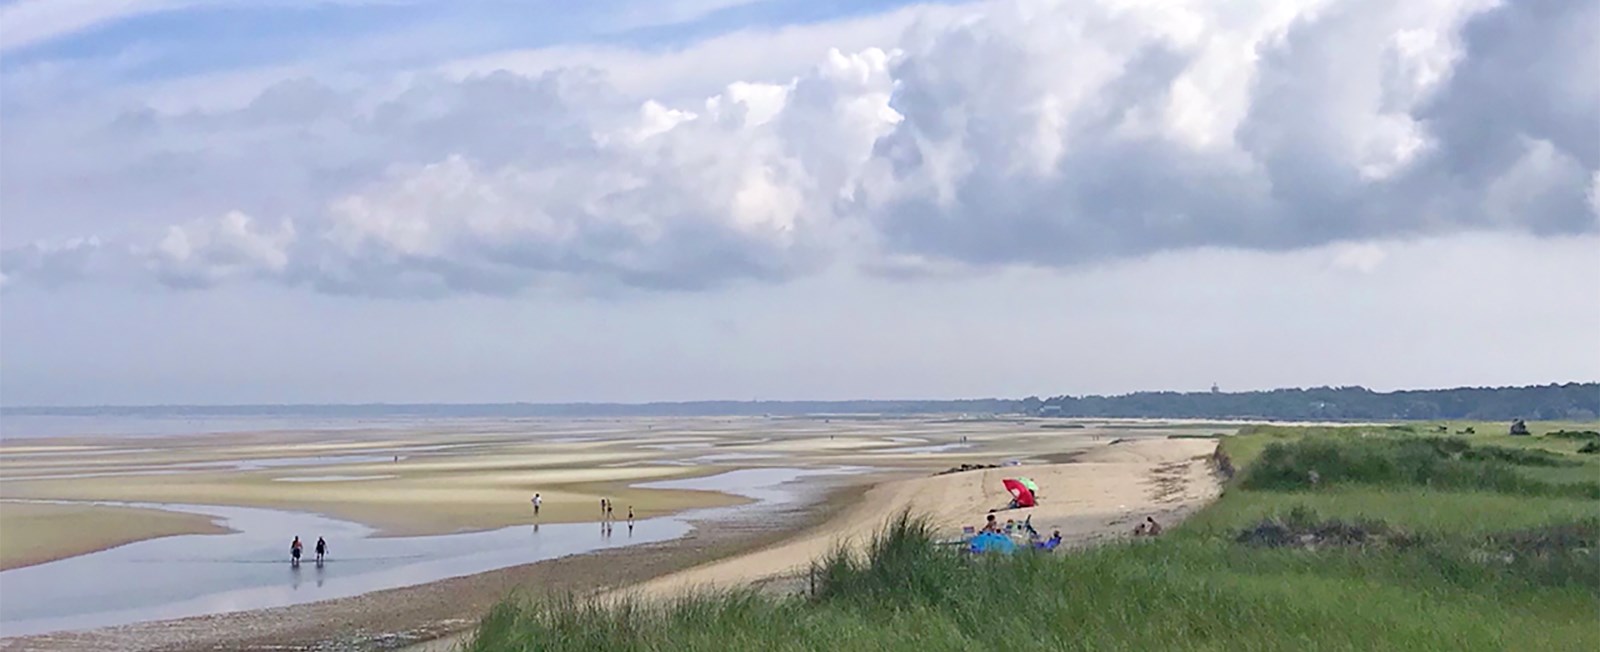 From bustling businesses to beautiful beaches, the town of Brewster has it all! Join us as we tour this quintessential Cape Cod town in the latest episode of EsCape TV.